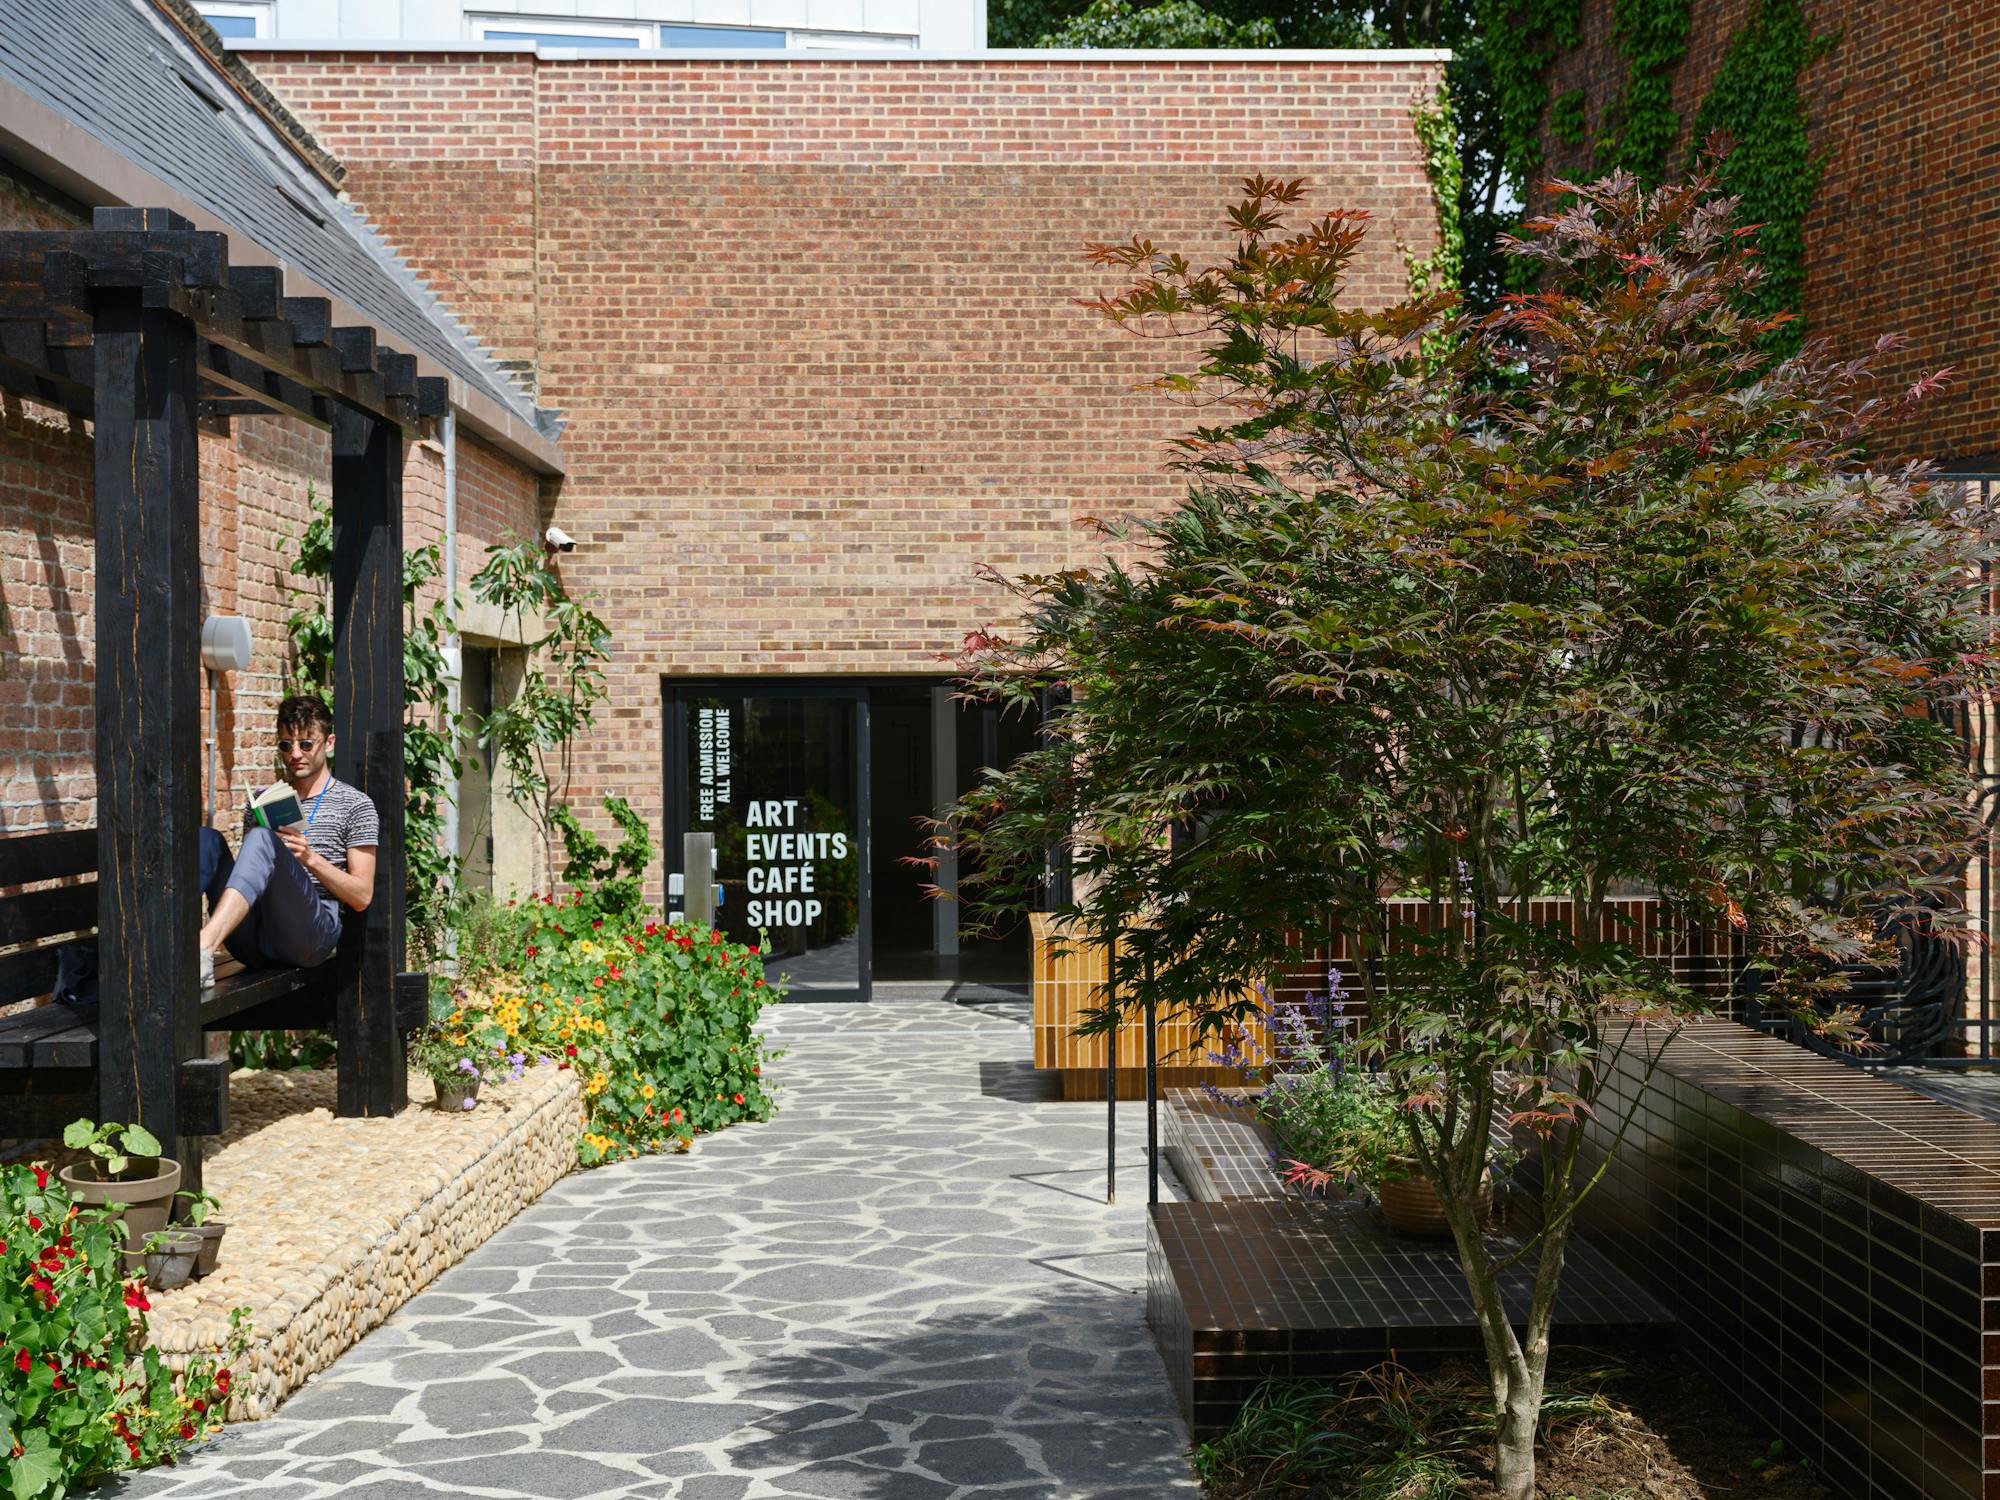 Studio Voltaire's garden in summer, photographed on a sunny day. The garden is paved with irregular slabs that slope towards the entrance. a man sits on a black wooden pergola, reading a book.